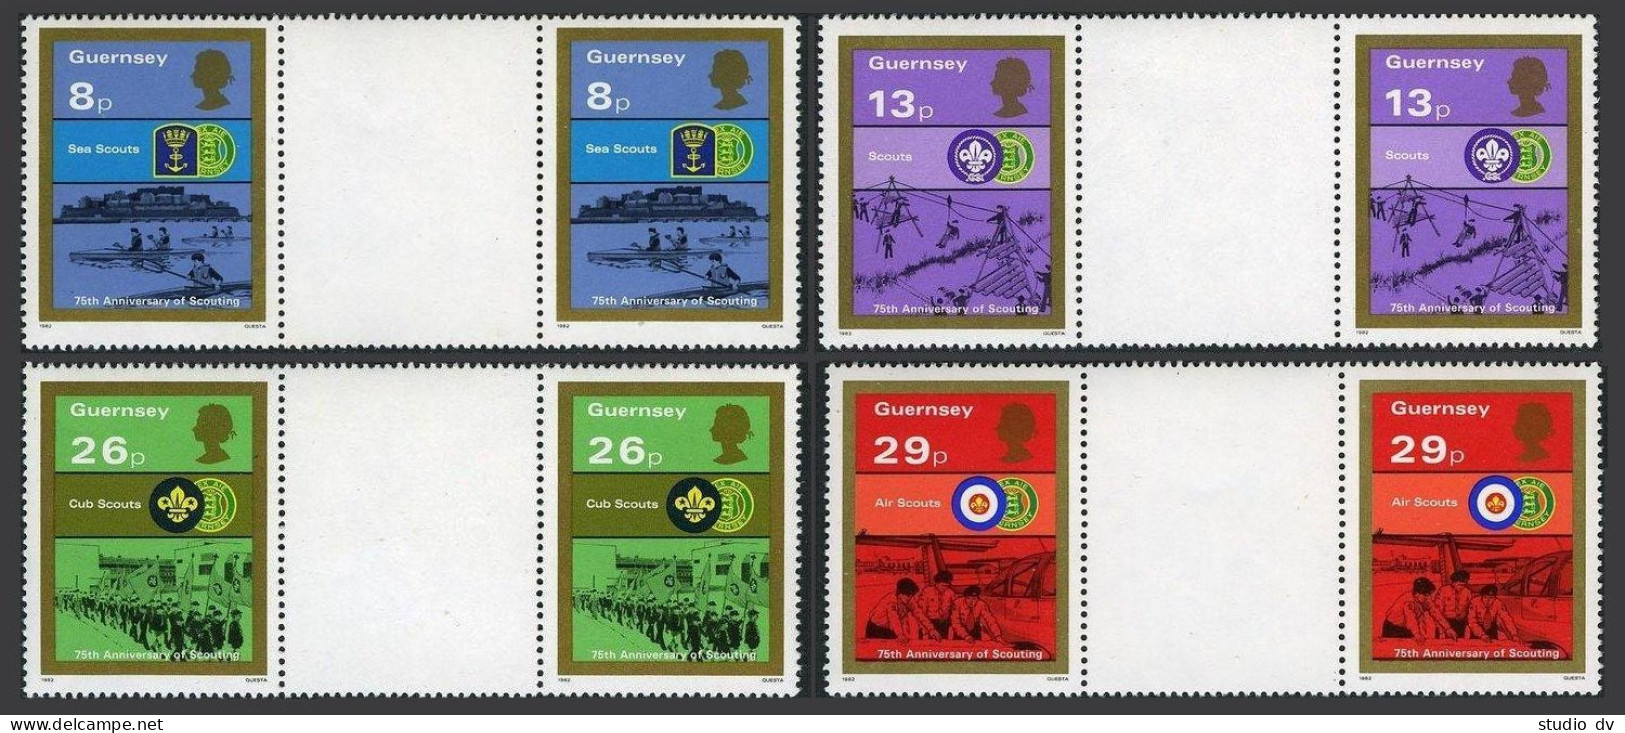 Guernsey 246-249 Gutter,MNH.Michel 251-254. Scouting Year 1982.Sea Scouts.Bridge - Guernesey